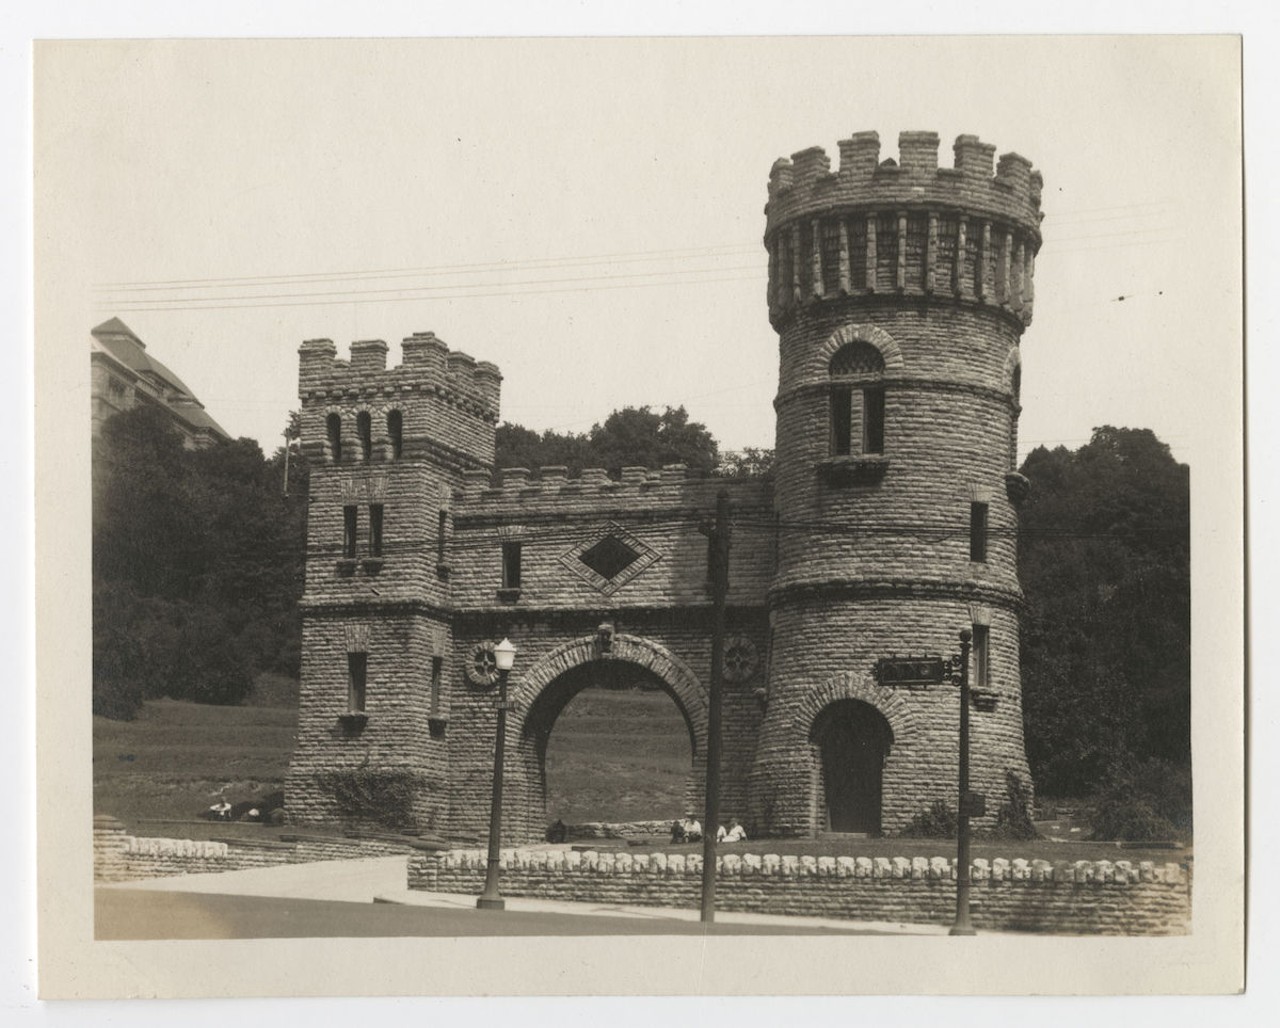 Elsinore gate at the entrance to Eden Park, date unknown
Also called the Elsinore Tower or Elsinore Arch, this building was constructed in 1883 as Cincinnati Water Works' valve house. It's said that its design was inspired by Elsinore Castle, or Kronborg Castle, in William Shakespeare's tragedy Hamlet.